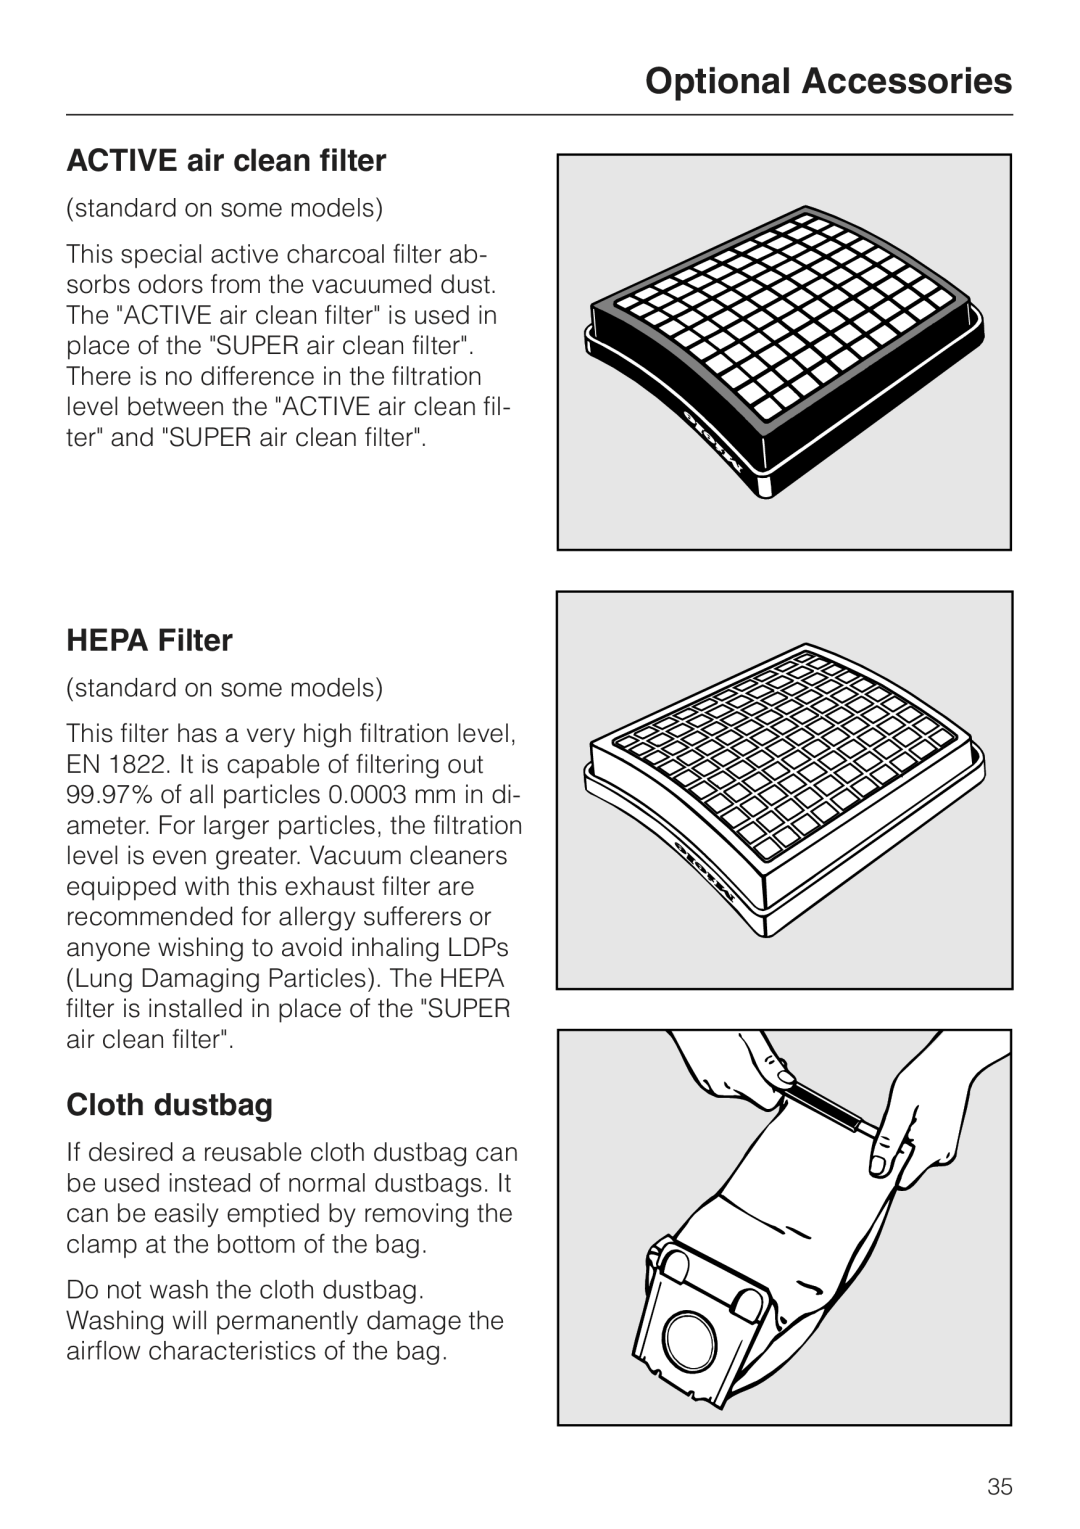 Miele S157 manual ACTIVE air clean filter, HEPA Filter, Cloth dustbag, Optional Accessories 